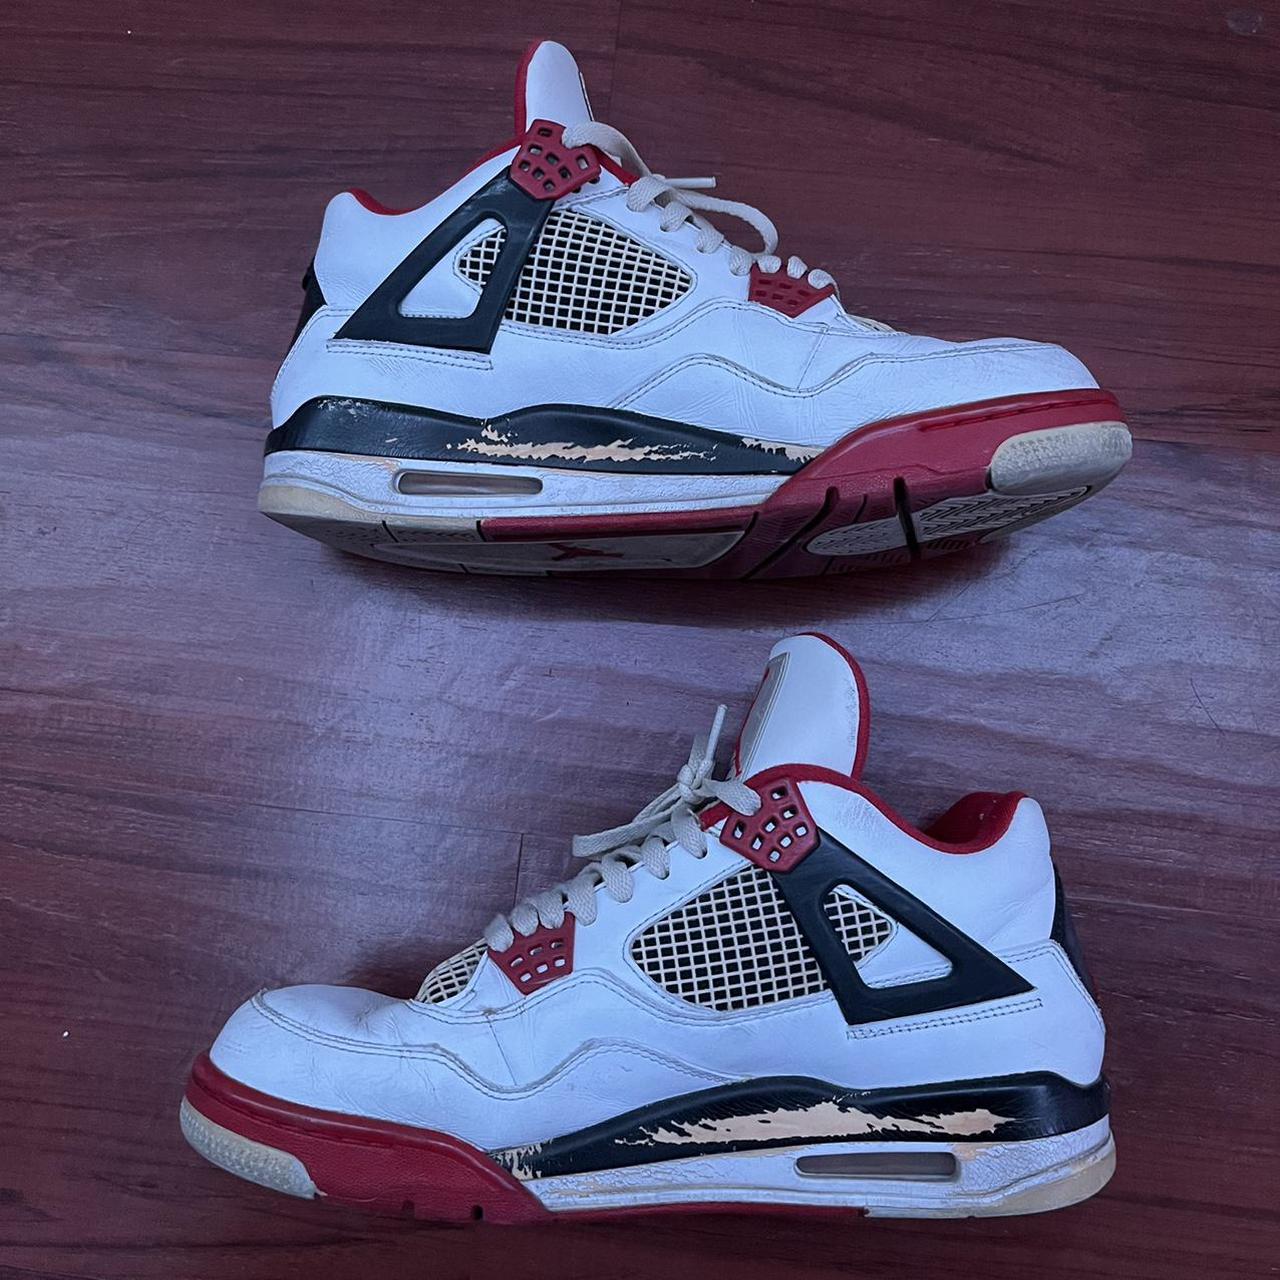 Product Image 2 - Jordan Fire Red 4s
-Size 10.5
-back